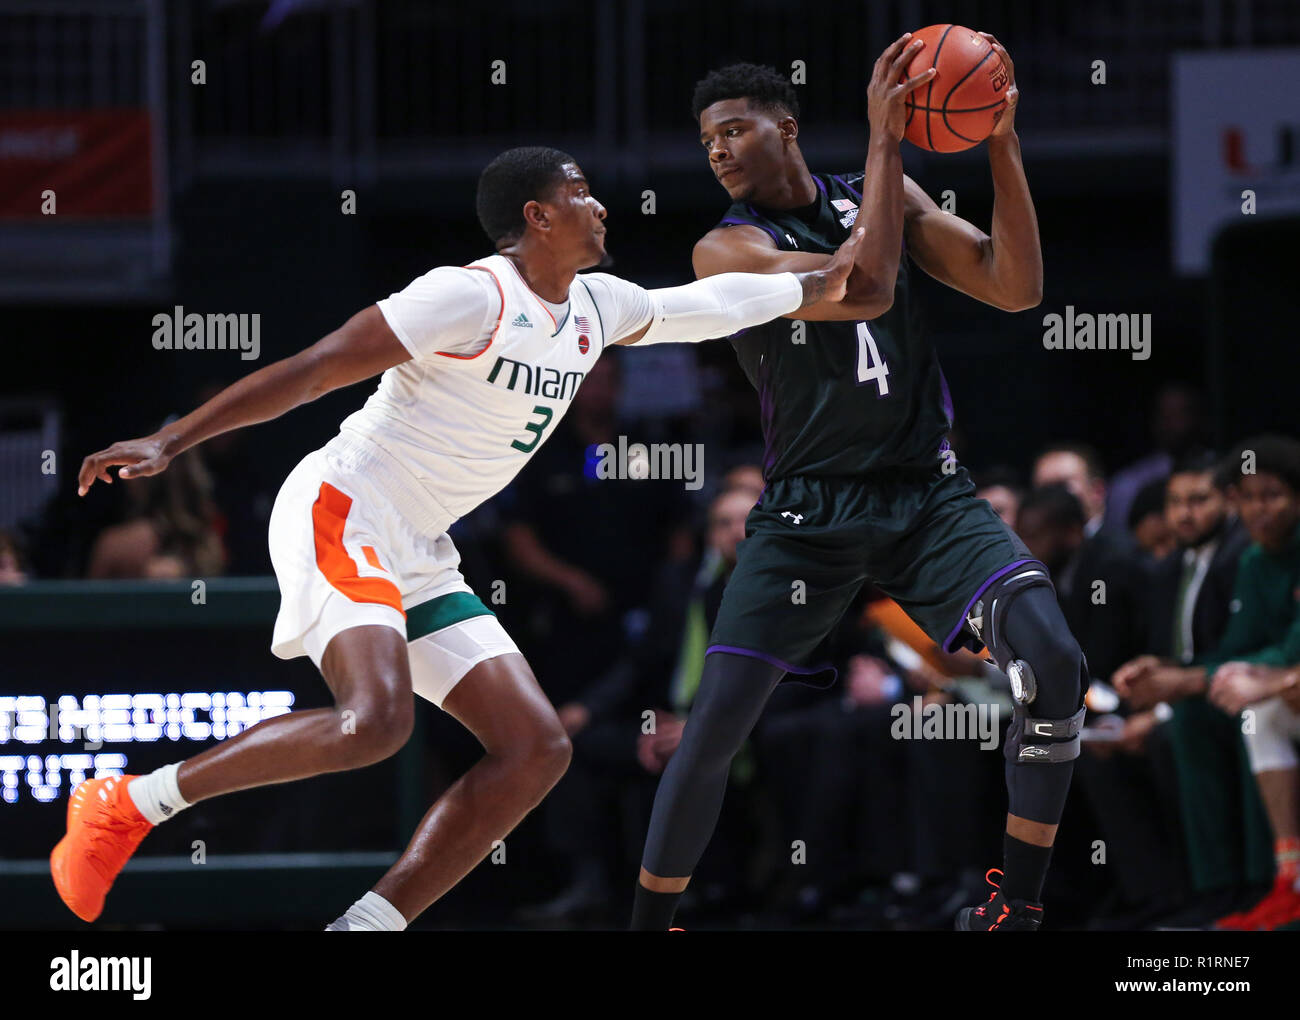 Coral Gables, Florida, USA. 13th Nov, 2018. Stephen F. Austin Lumberjacks forward Davonte Fitzgerald (4) looks to pass the ball defended by Miami Hurricanes guard Anthony Lawrence II (3) during the first half of the NCAA mens basketball game between the Stephen F. Austin Lumberjacks and the University of Miami Hurricanes at the Watsco Center in Coral Gables, Florida. Mario Houben/CSM/Alamy Live News Stock Photo